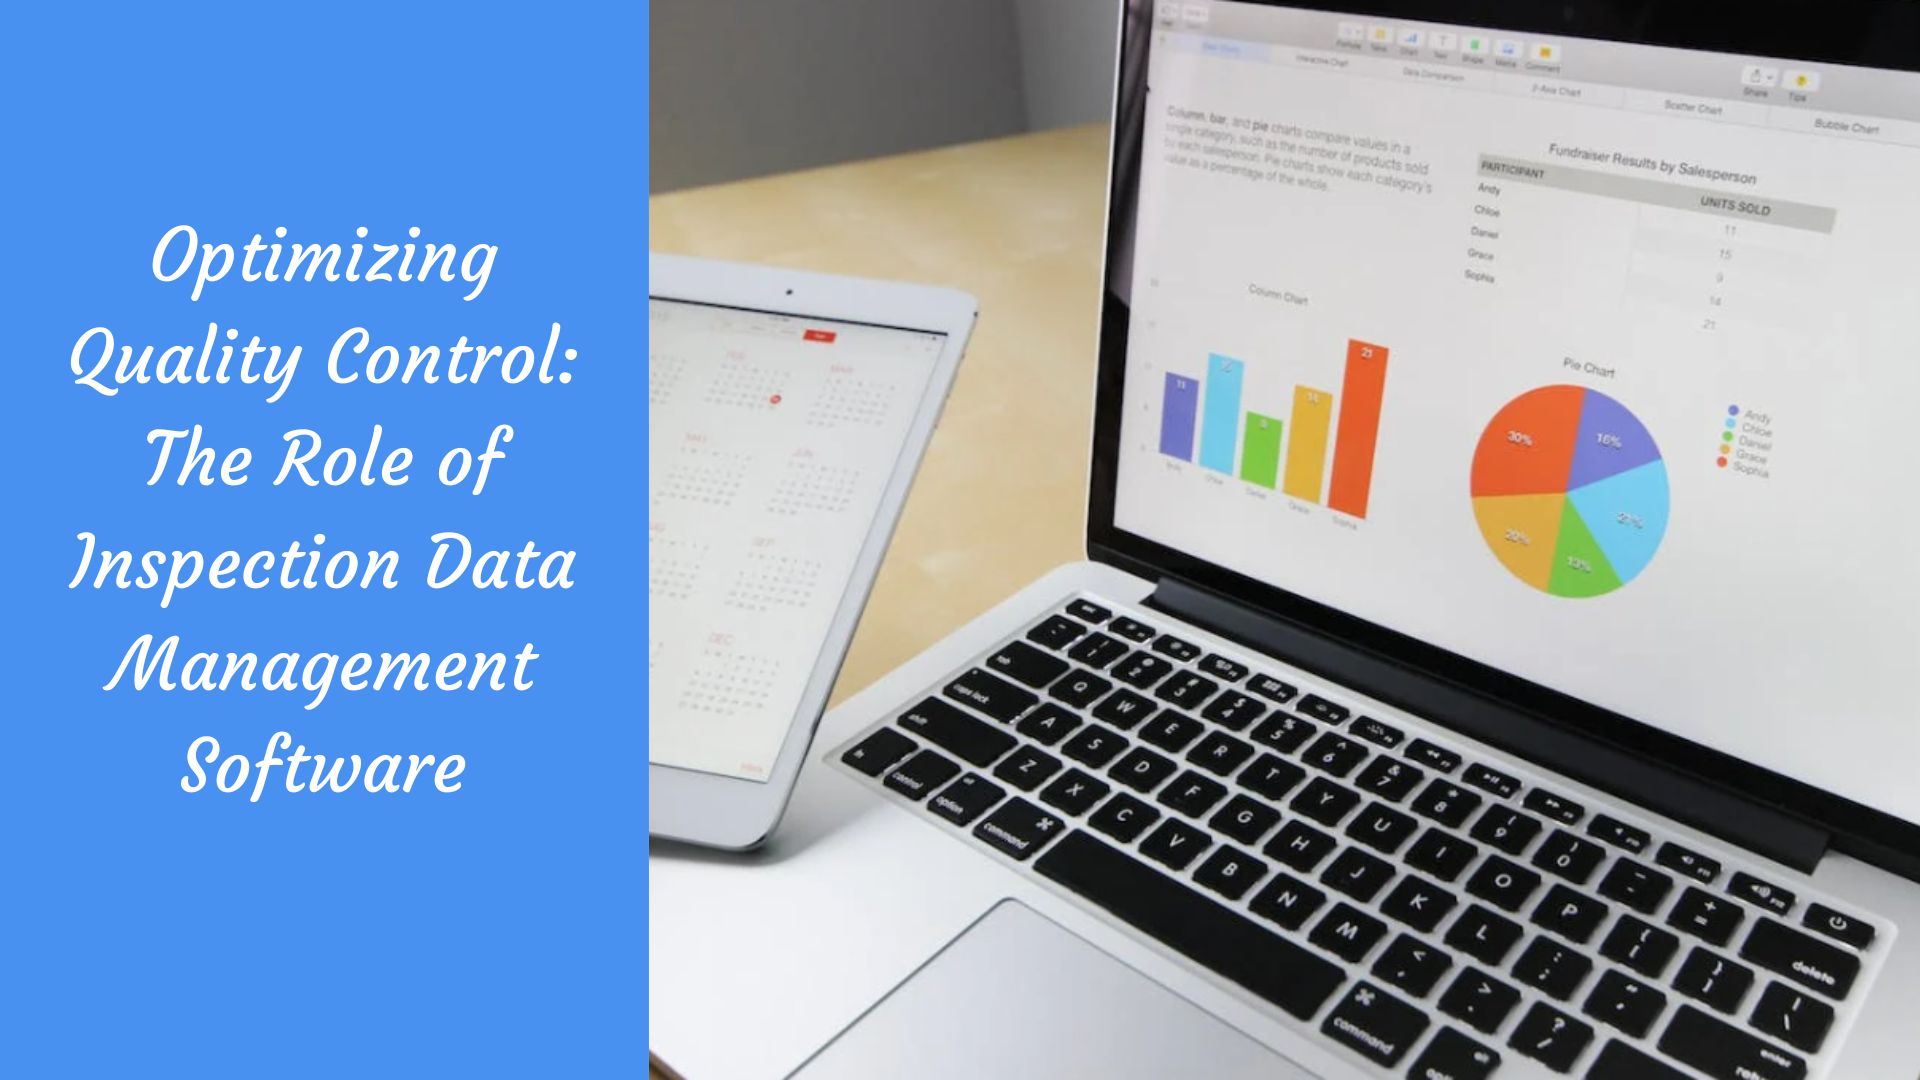 Optimizing Quality Control: The Role of Inspection Data Management Software